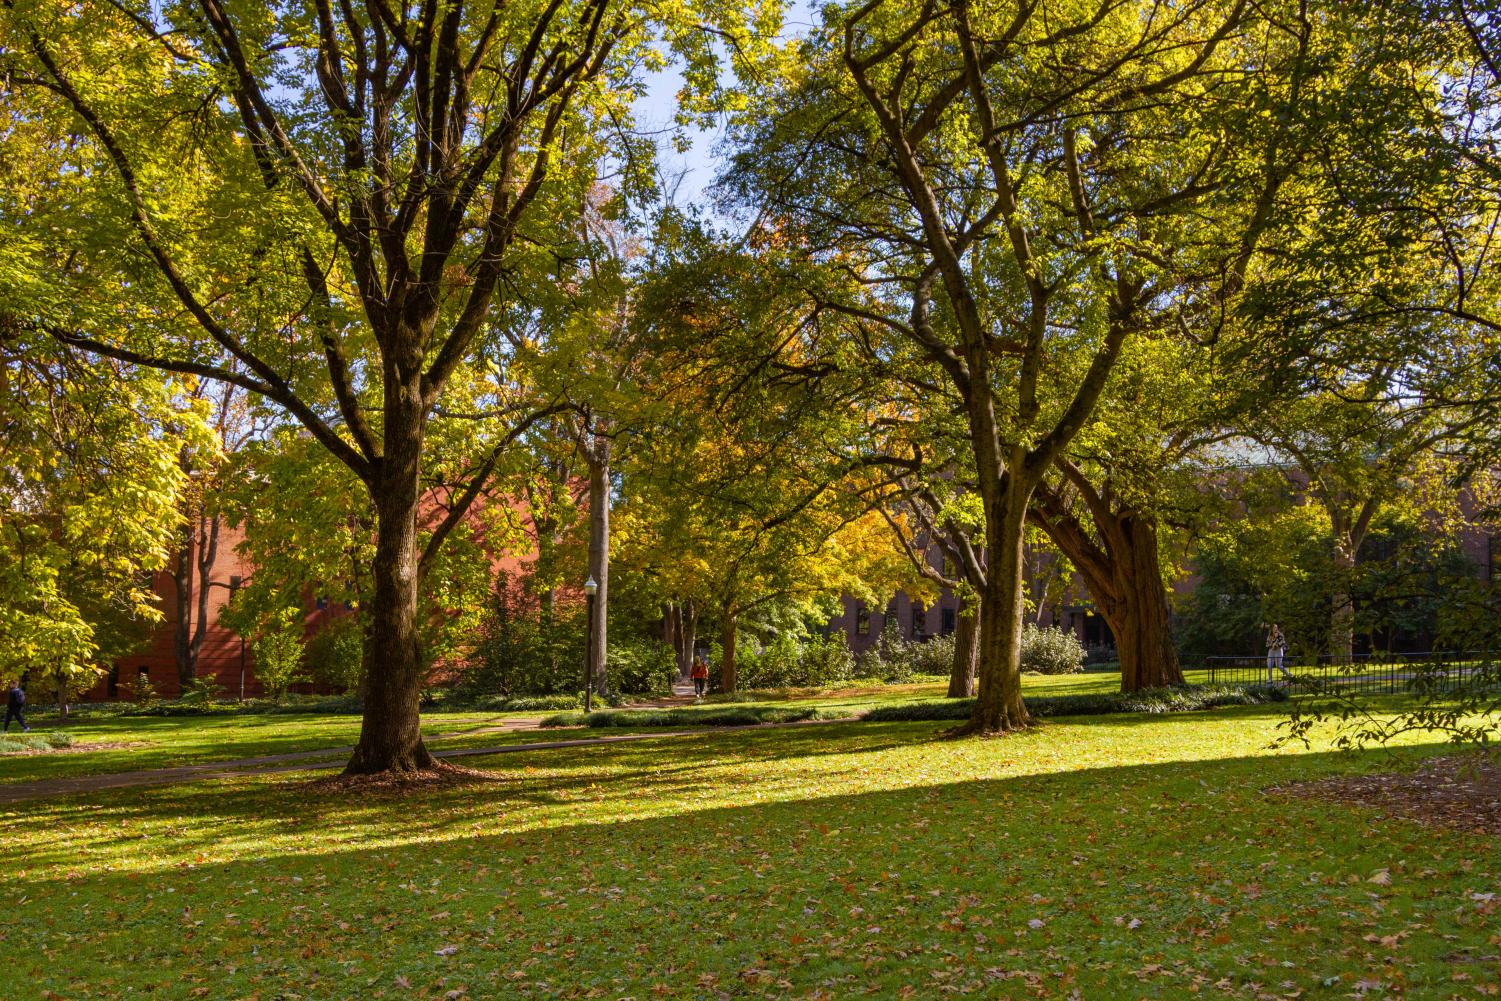 Trees on campus, as photographed on Nov. 5, 2021